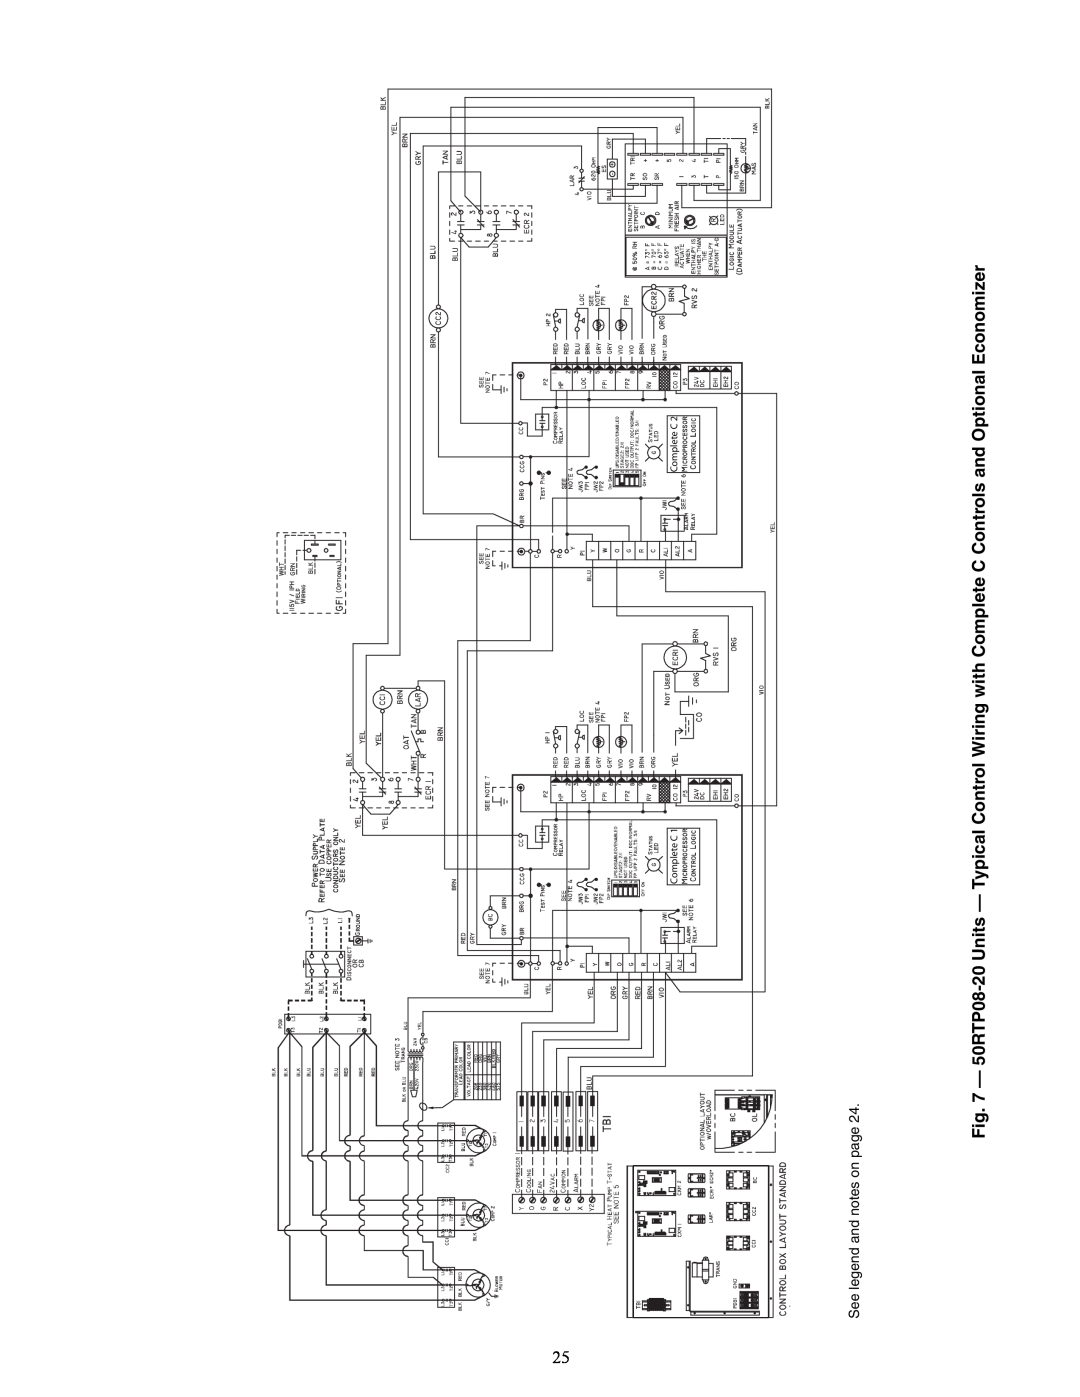 Carrier 50RTP03-20 specifications See legend and notes on page, a50-8554, Complete C 